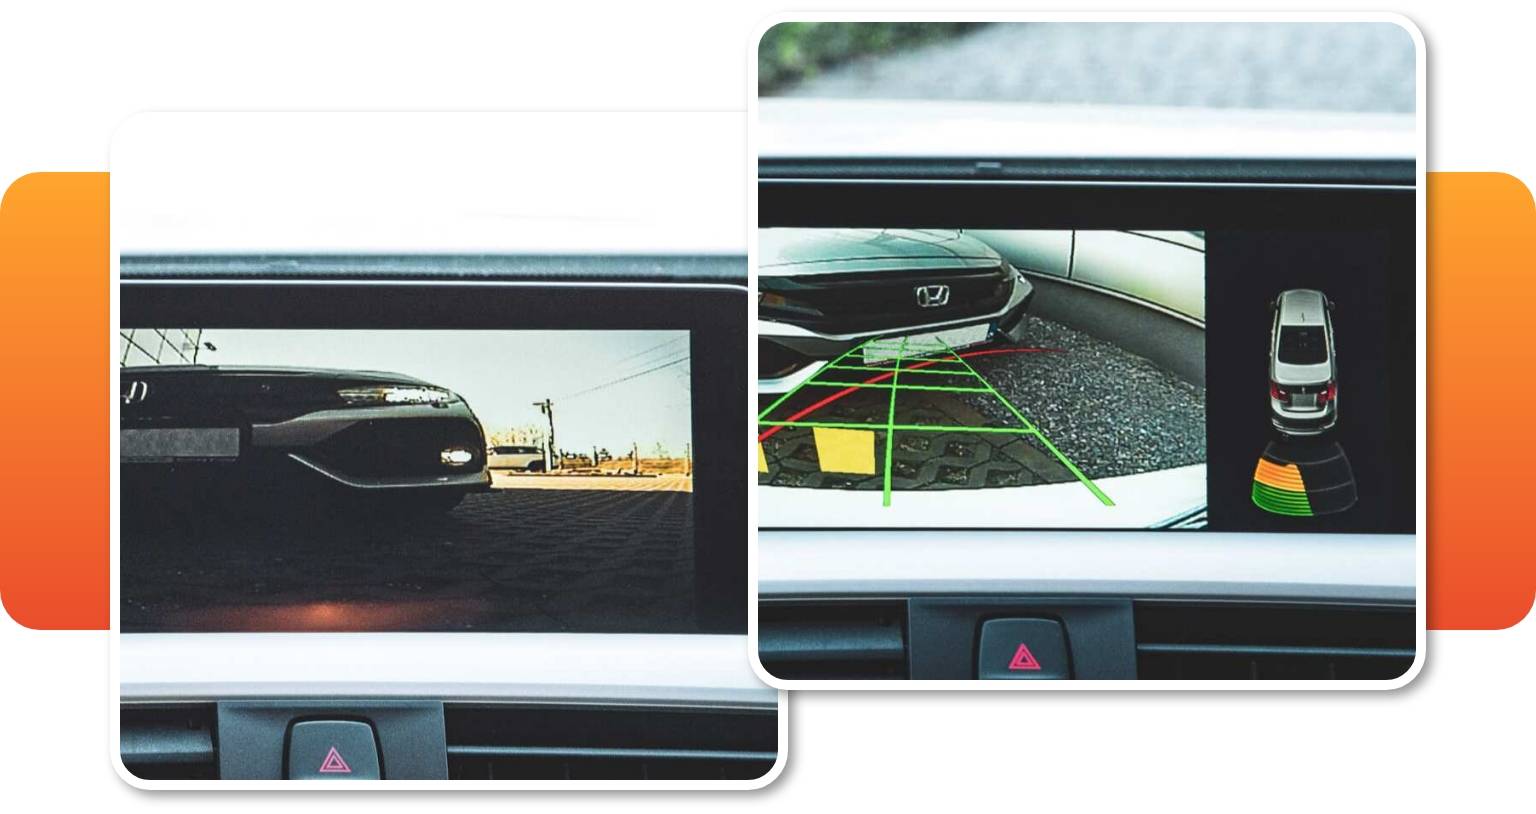 MMI Pro integration with front and rear view cameras